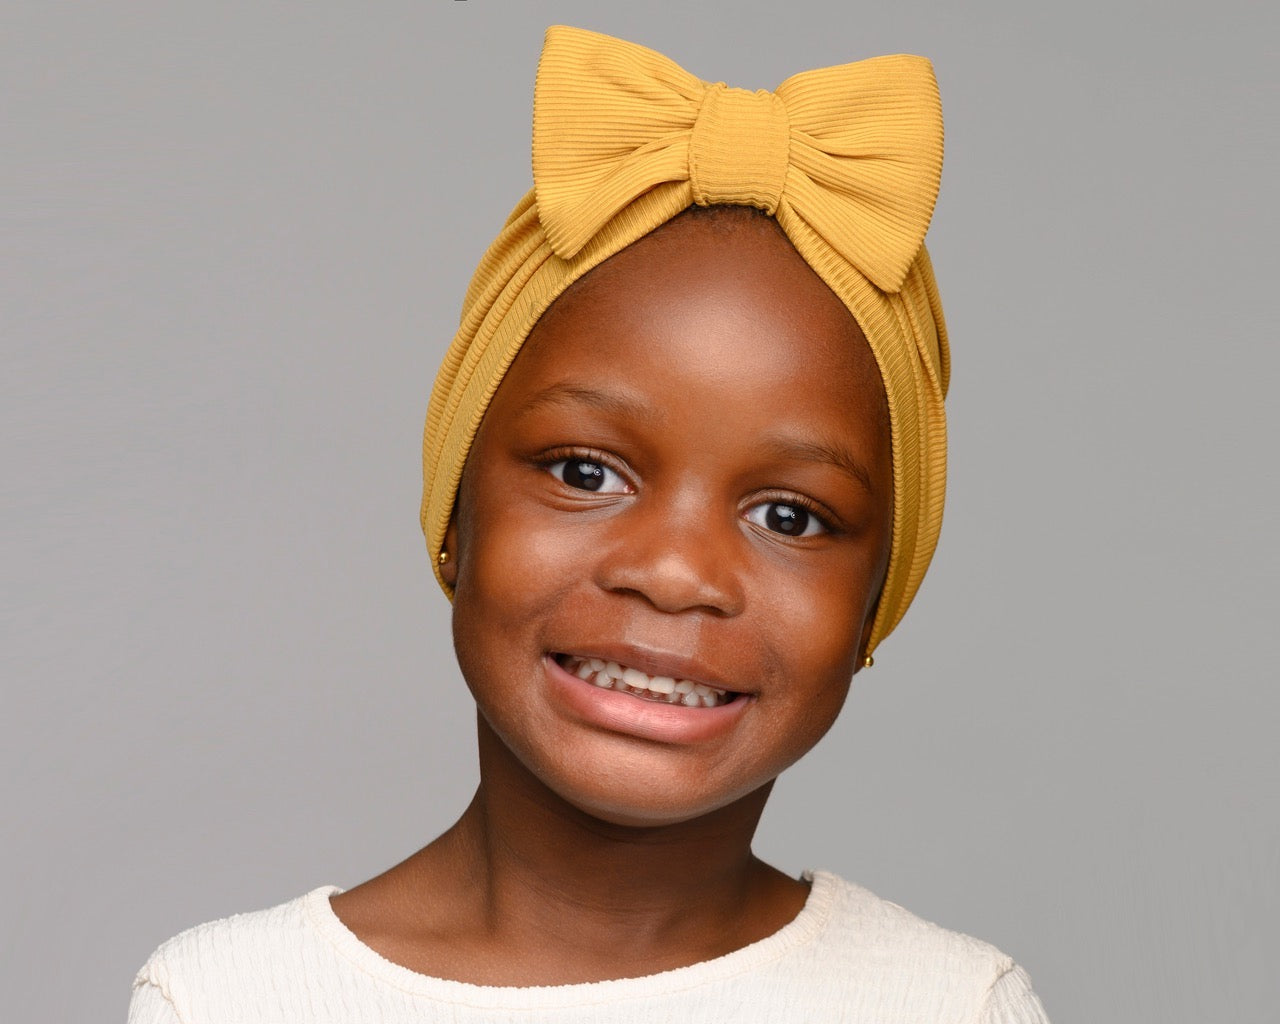 Child infant girl wearing a mustard satin-lined turban with a bow